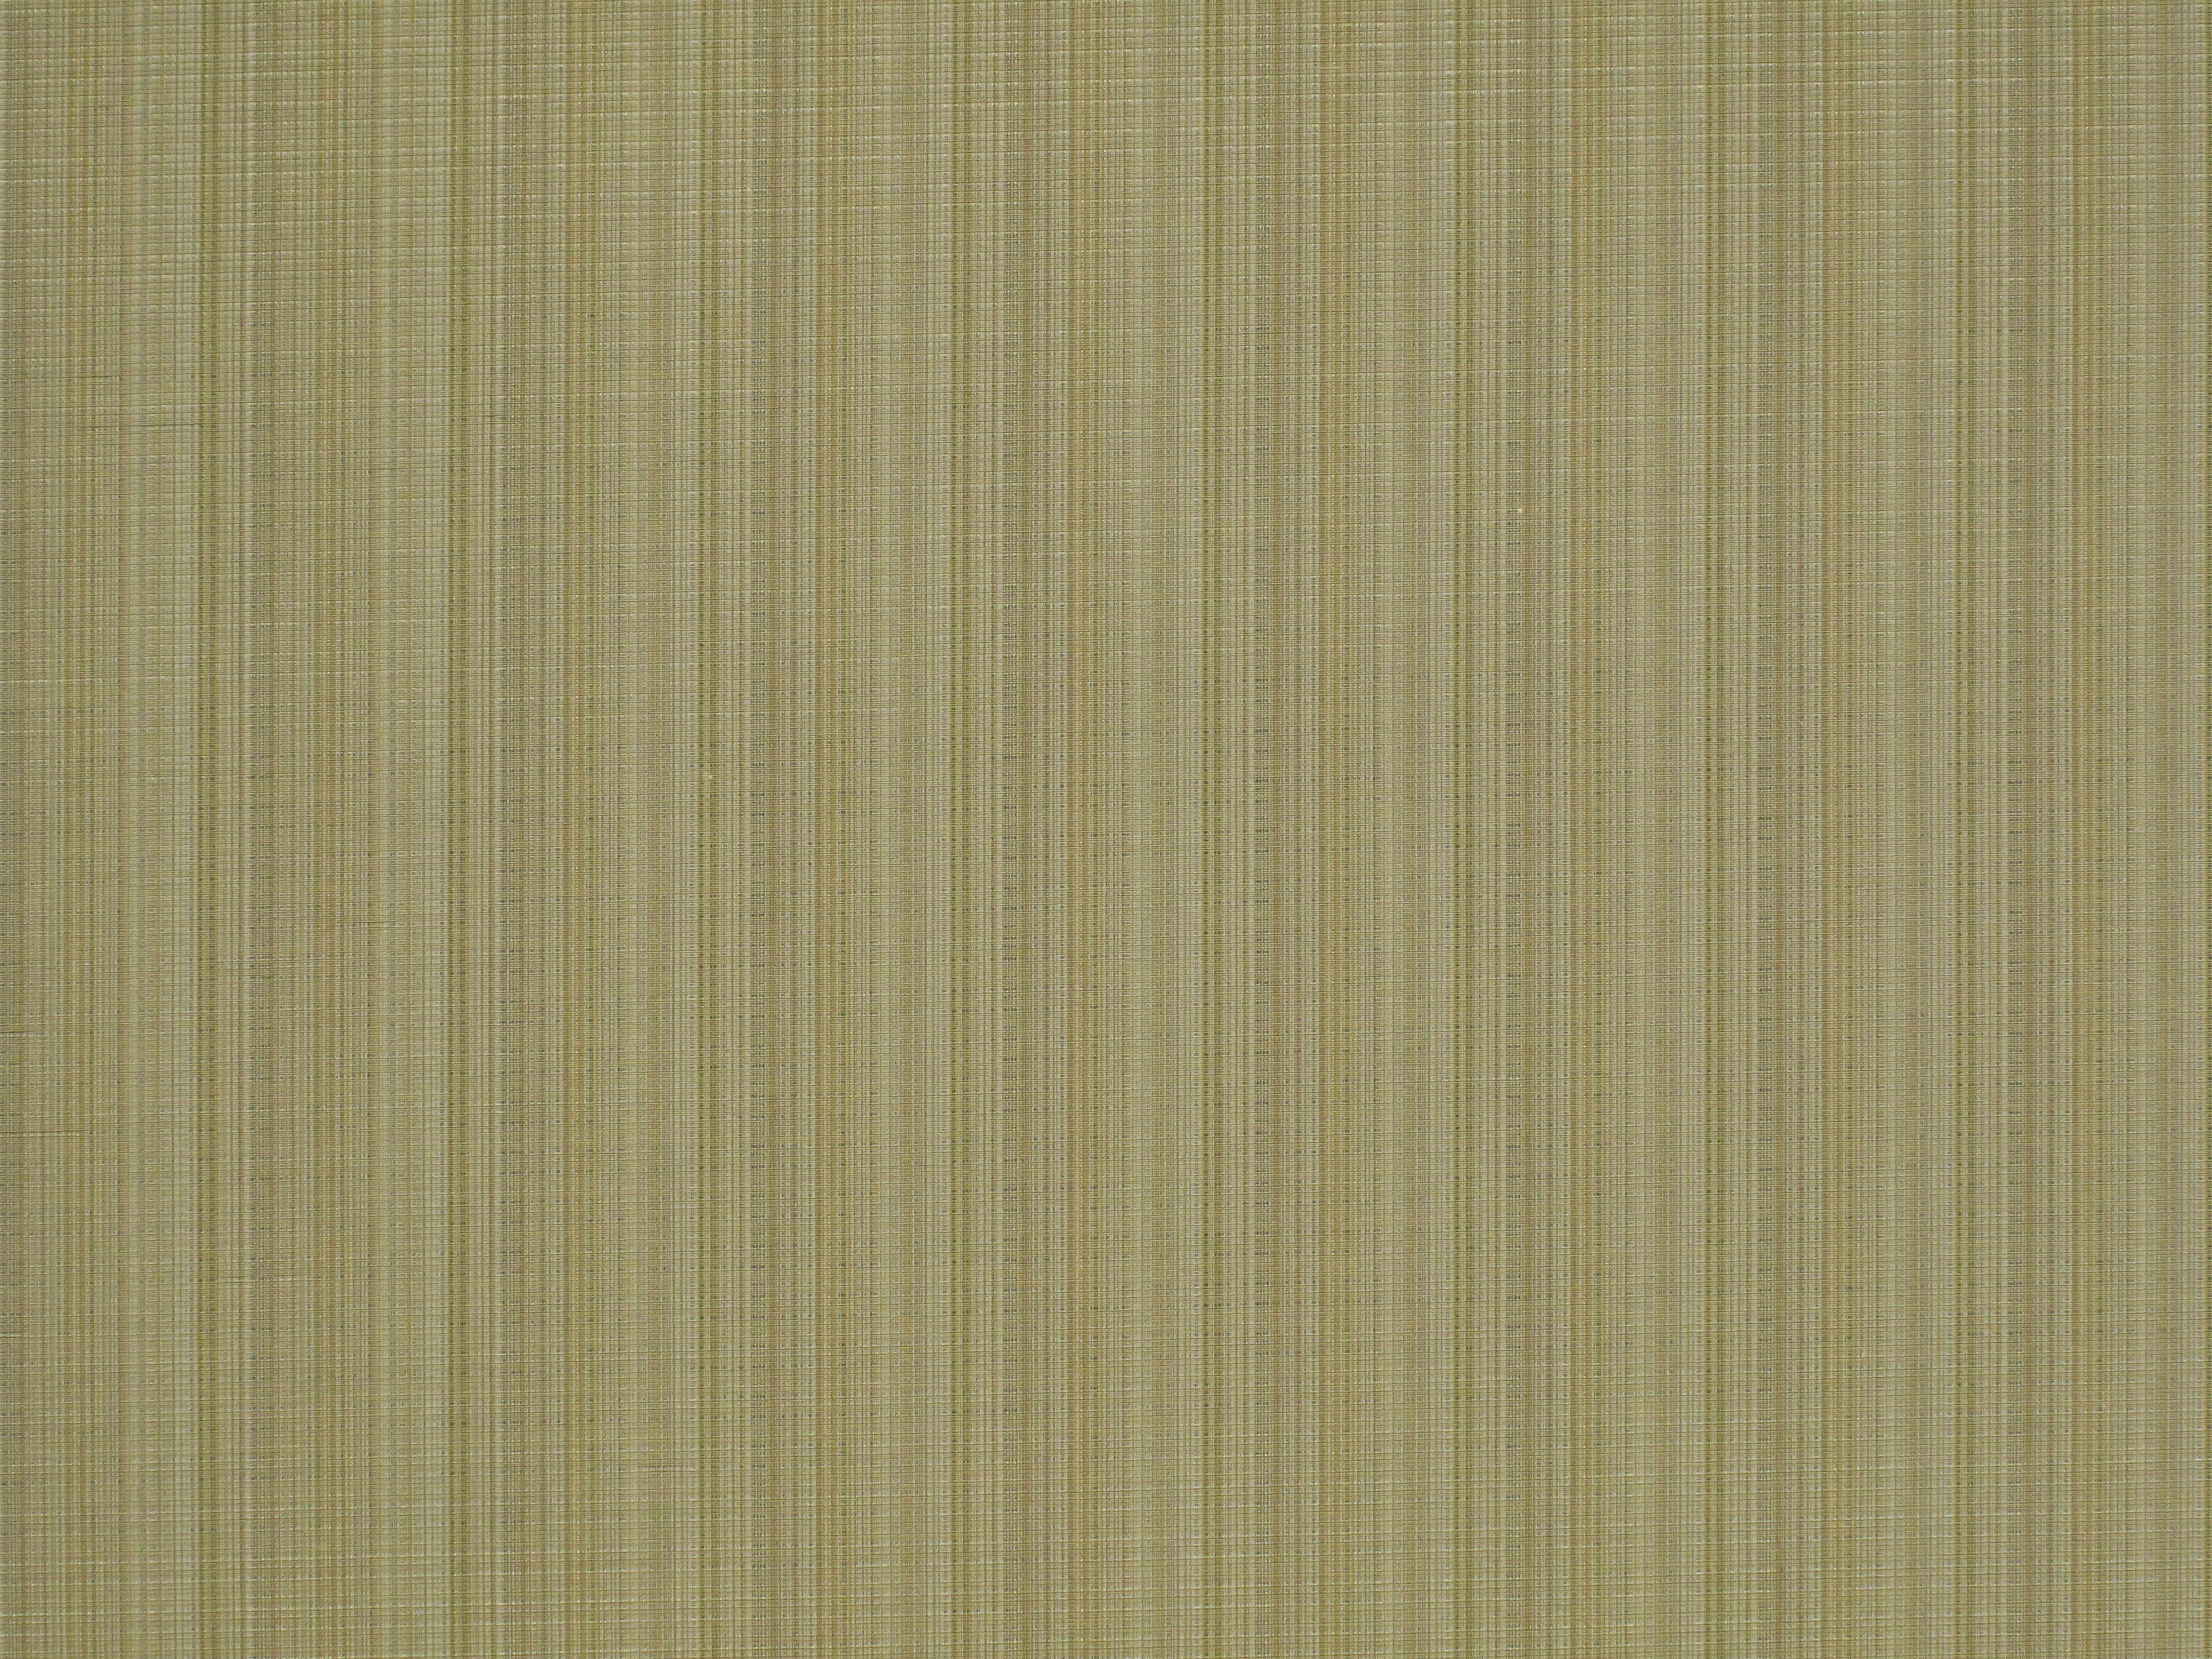 Umbria fabric in grass color - pattern number HB 09042504 - by Scalamandre in the Old World Weavers collection